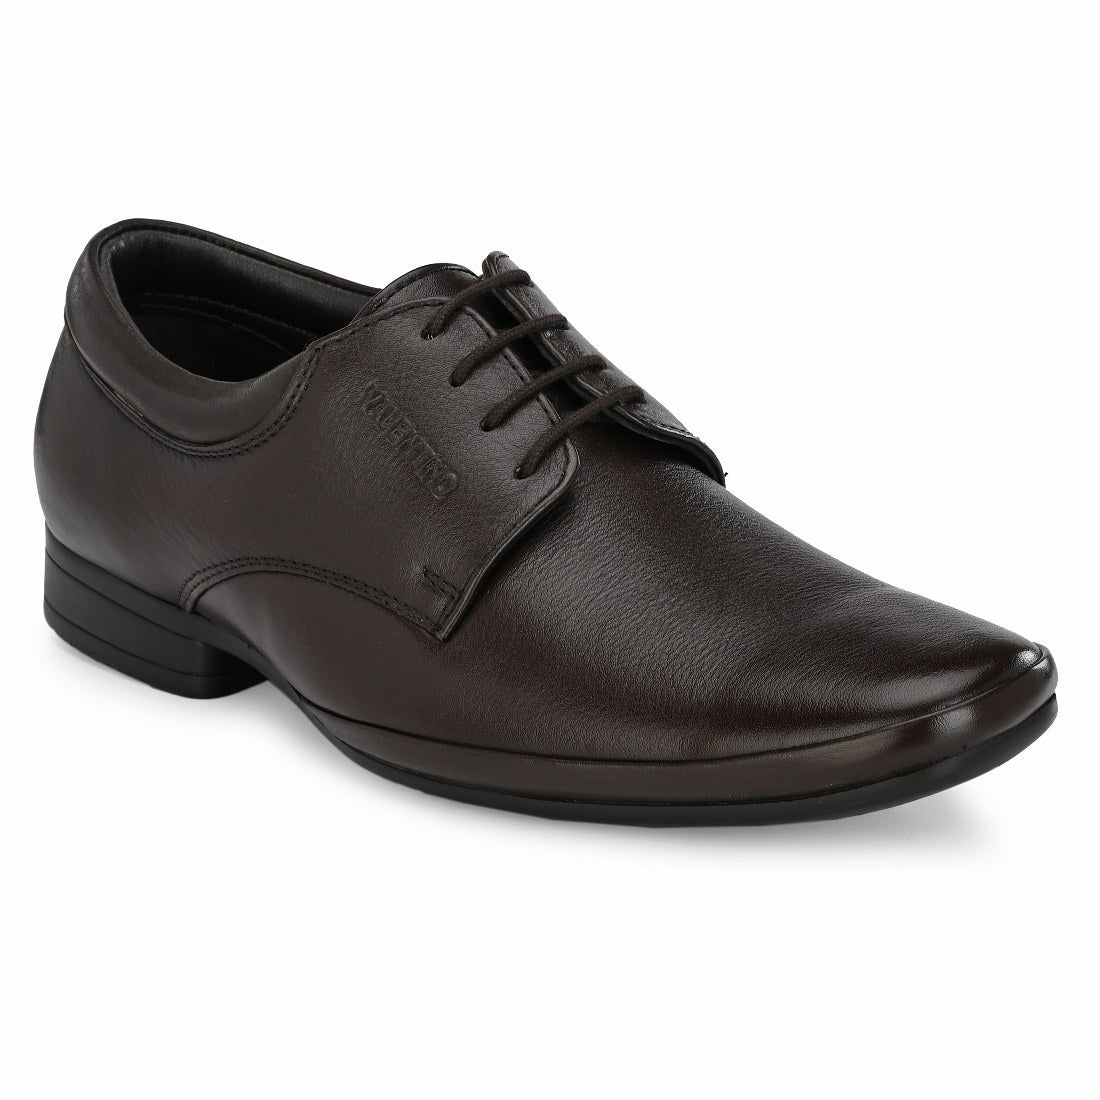 CALIFORNIA-52A MEN LEATHER BROWN FORMAL LACE UP SHOE DERBY STYLE